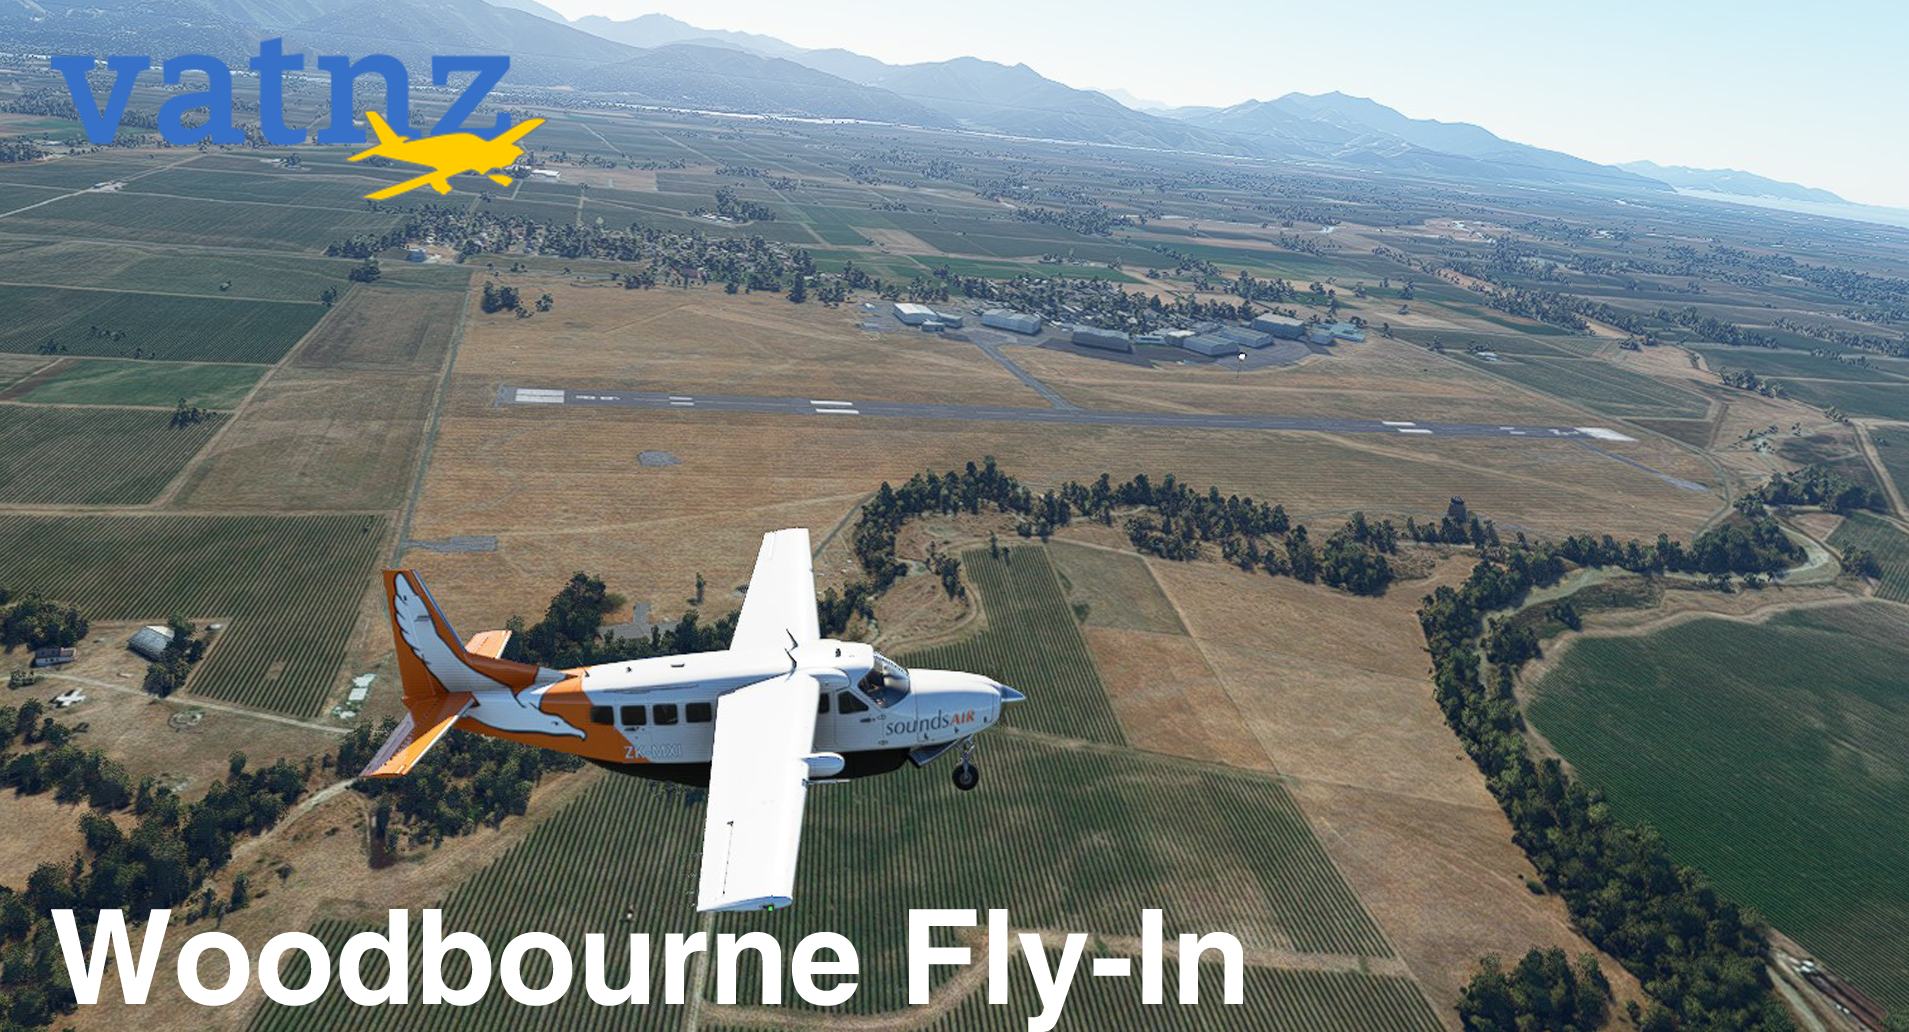 Woodbourne Fly-in